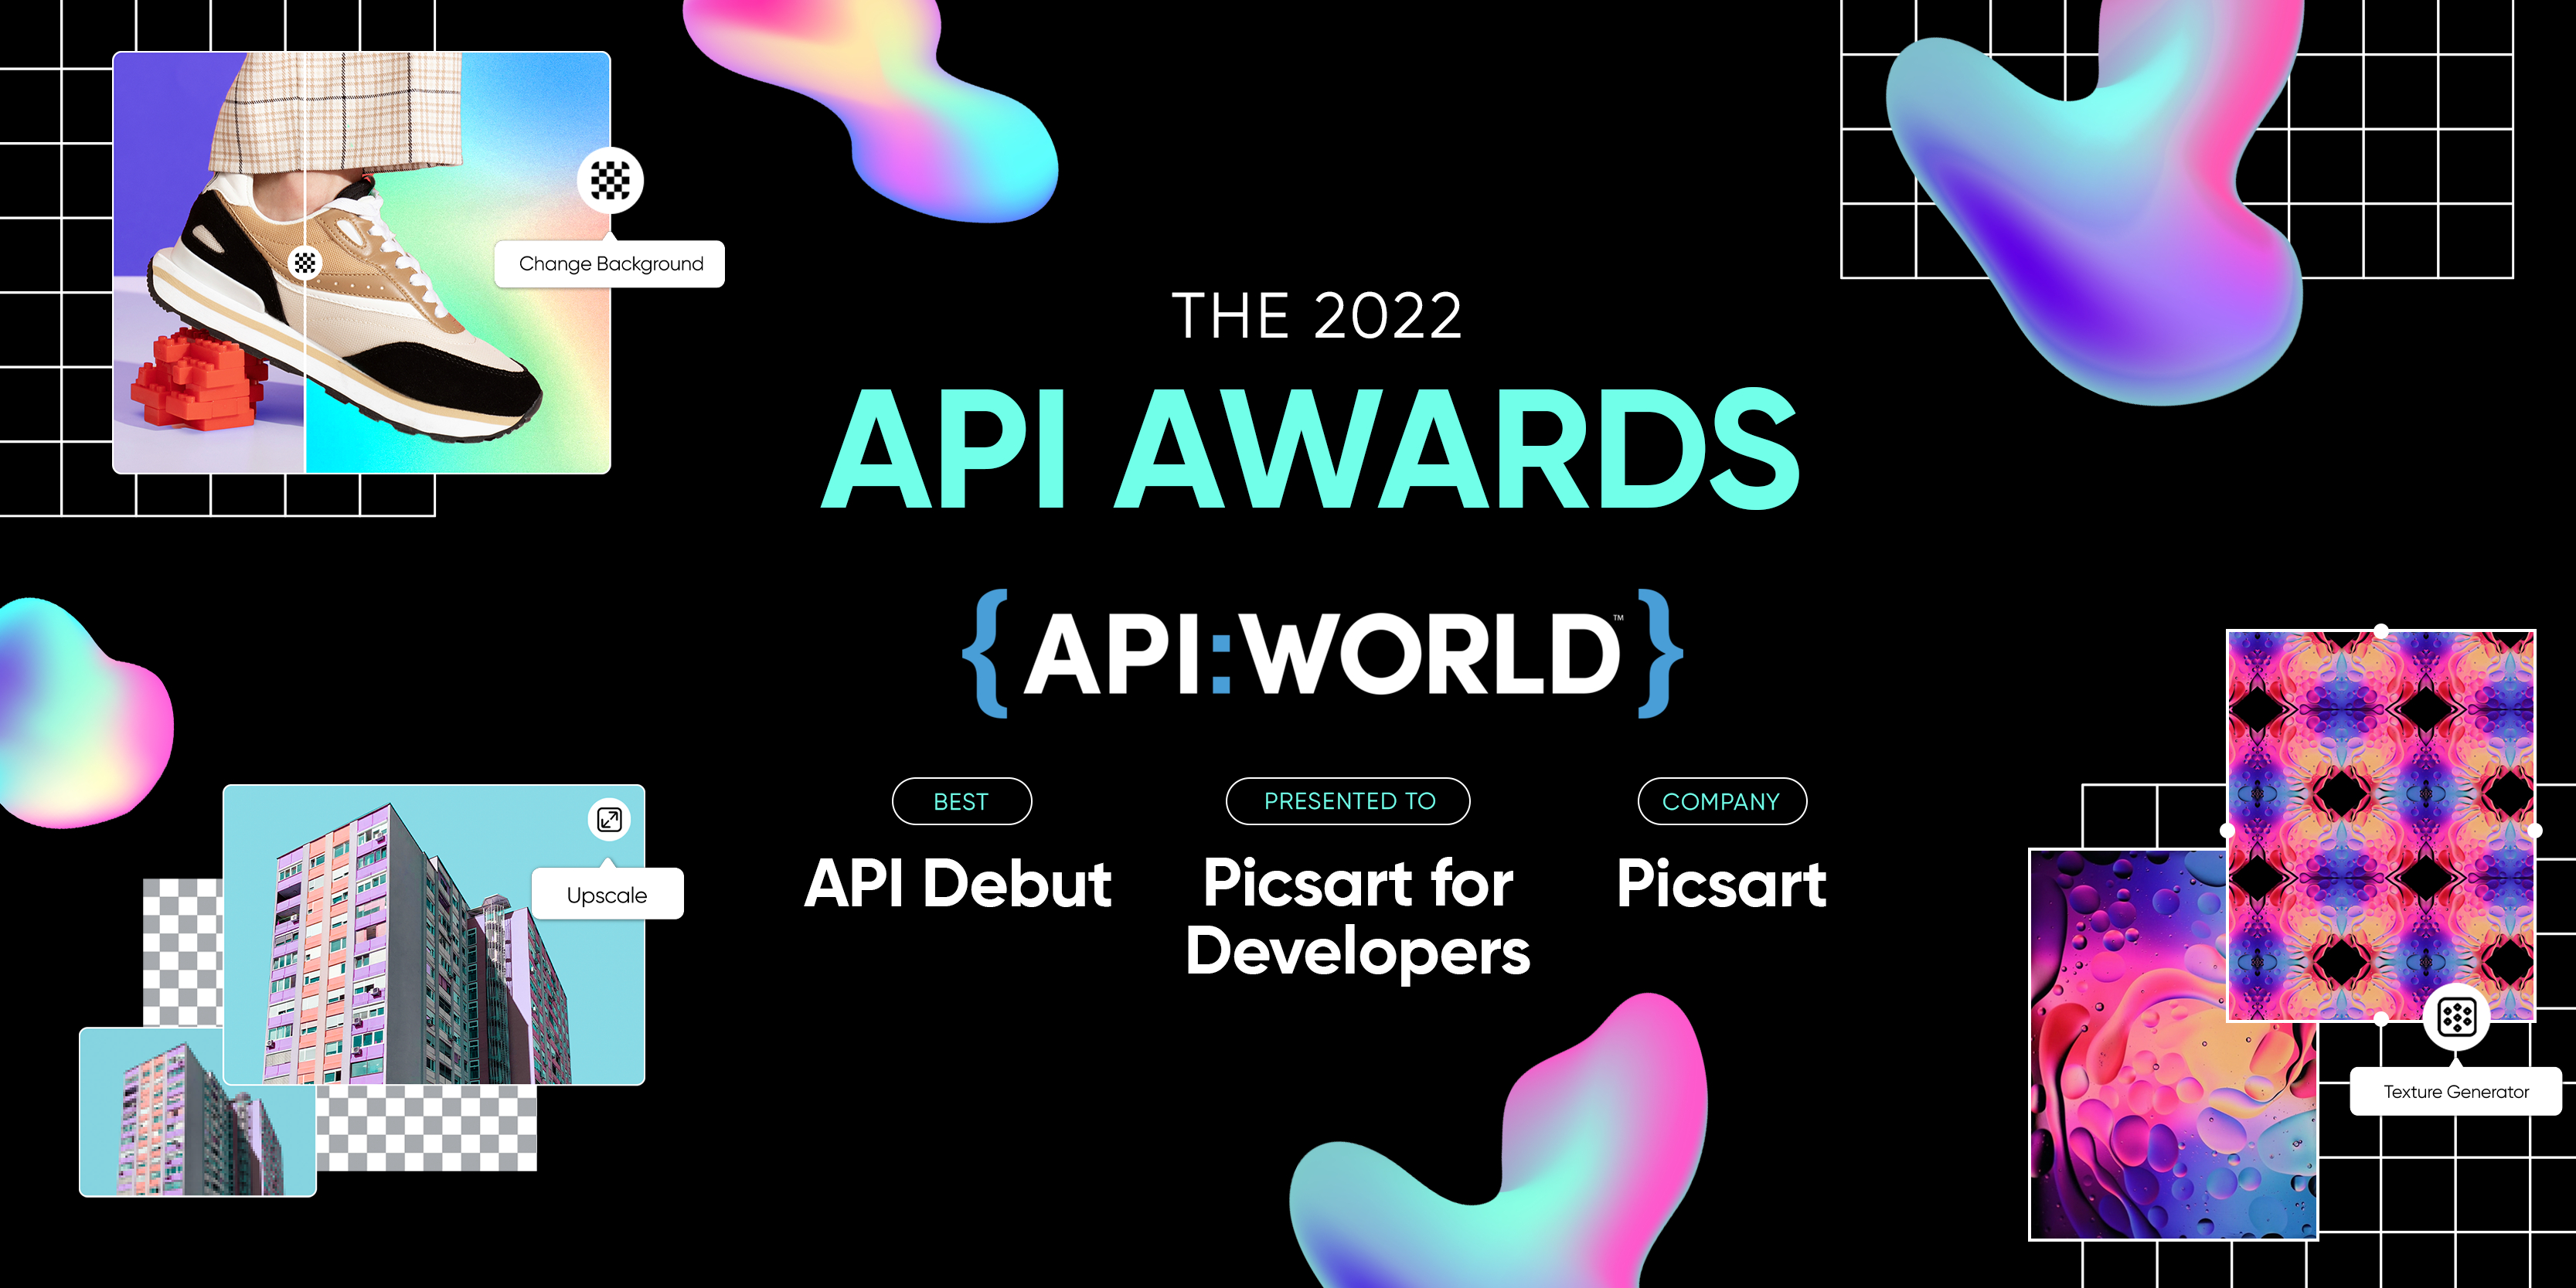 Picsart for Developers Wins “Best API Debut” at 2022 API Awards; Launches  $1 Million Developer Fund | Business Wire